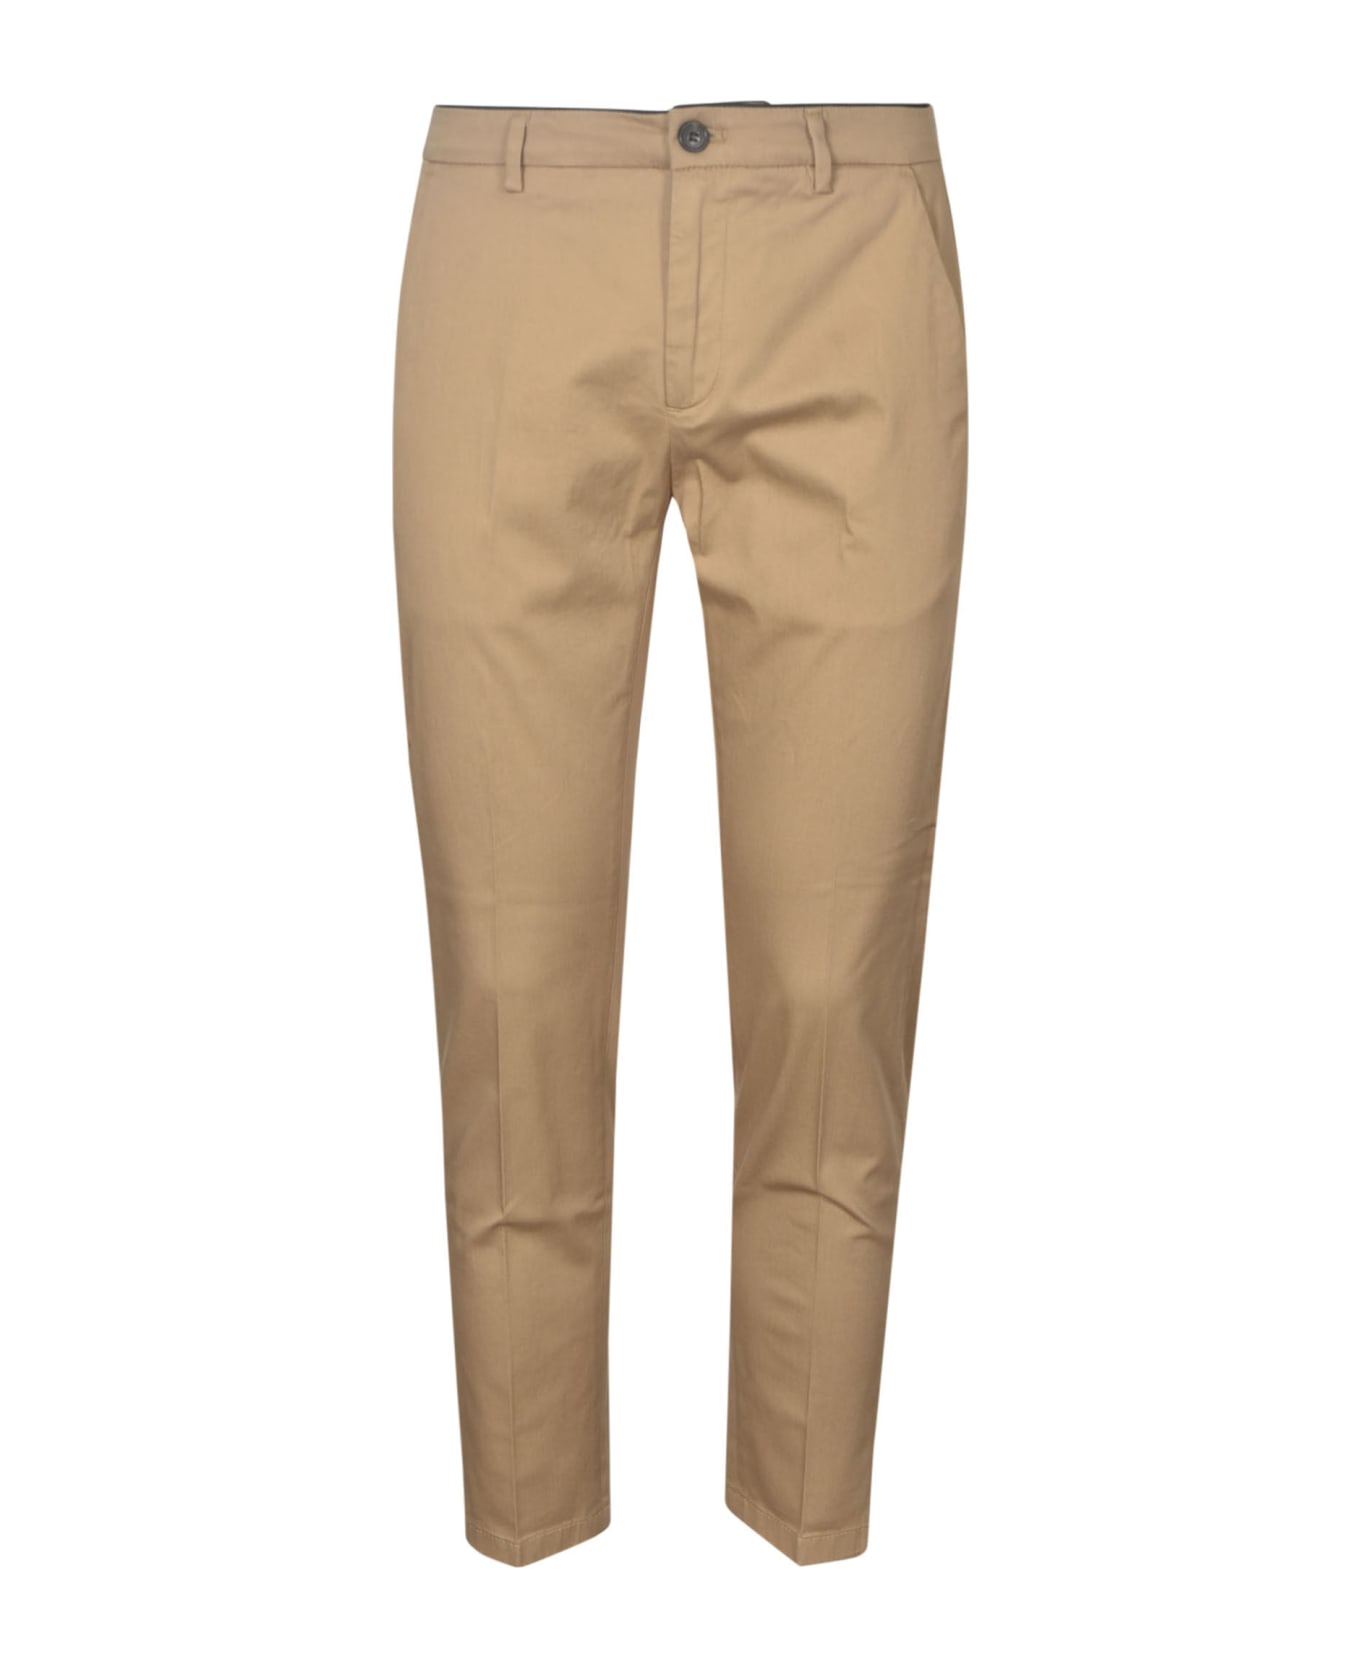 Department Five Off Regular Trousers - Beige ボトムス